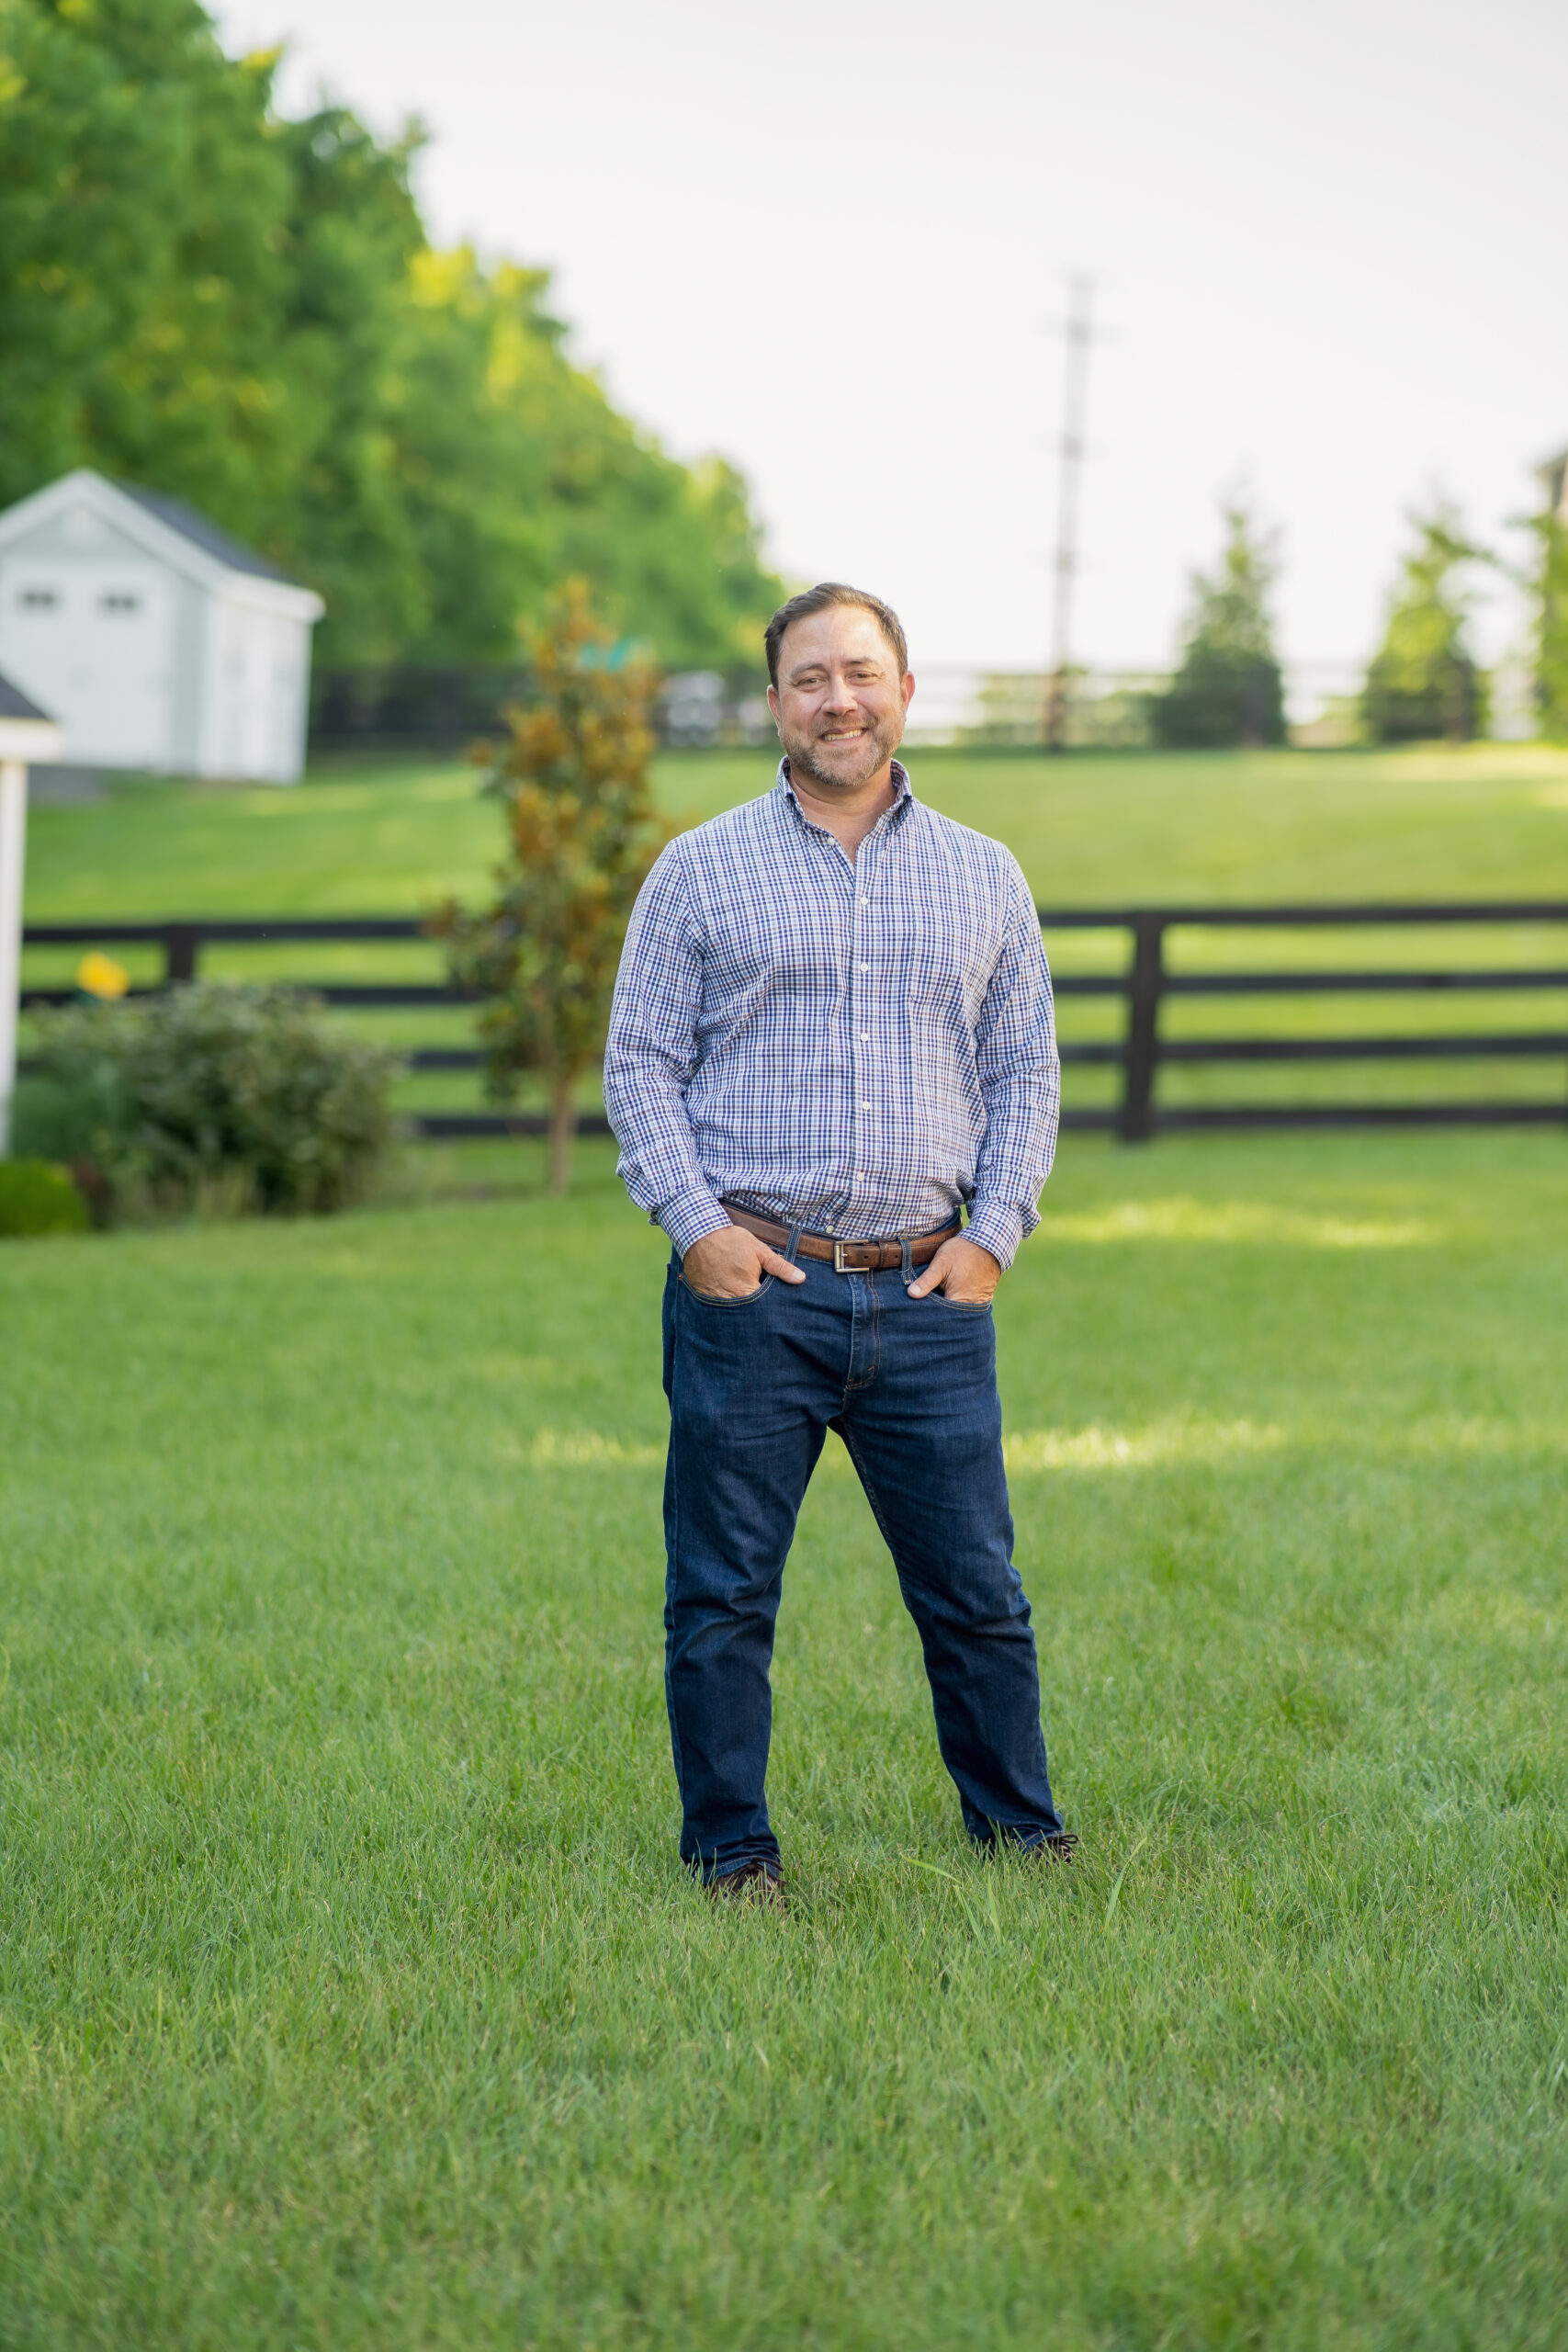 personal branding photo for realtors showing smiling male realtor in striped shirt with his hands in his pockets in a country setting with fenced fields in the background